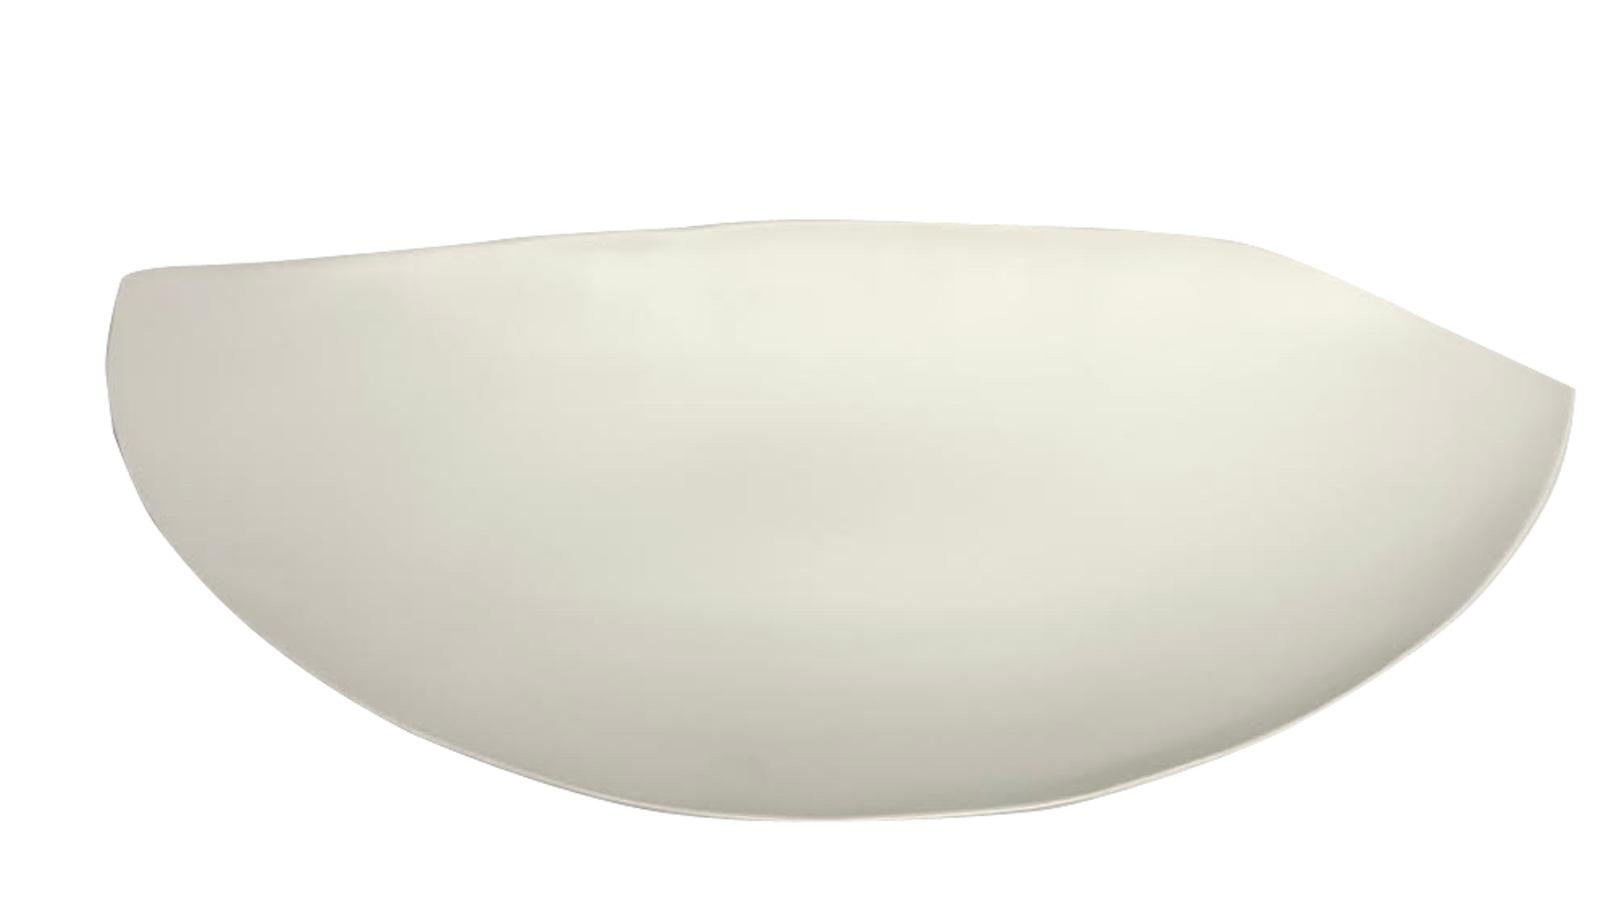 Contemporary Italian extra large curved fine ceramic bowl.
White in color.
Handmade in an organic half moon shape.
